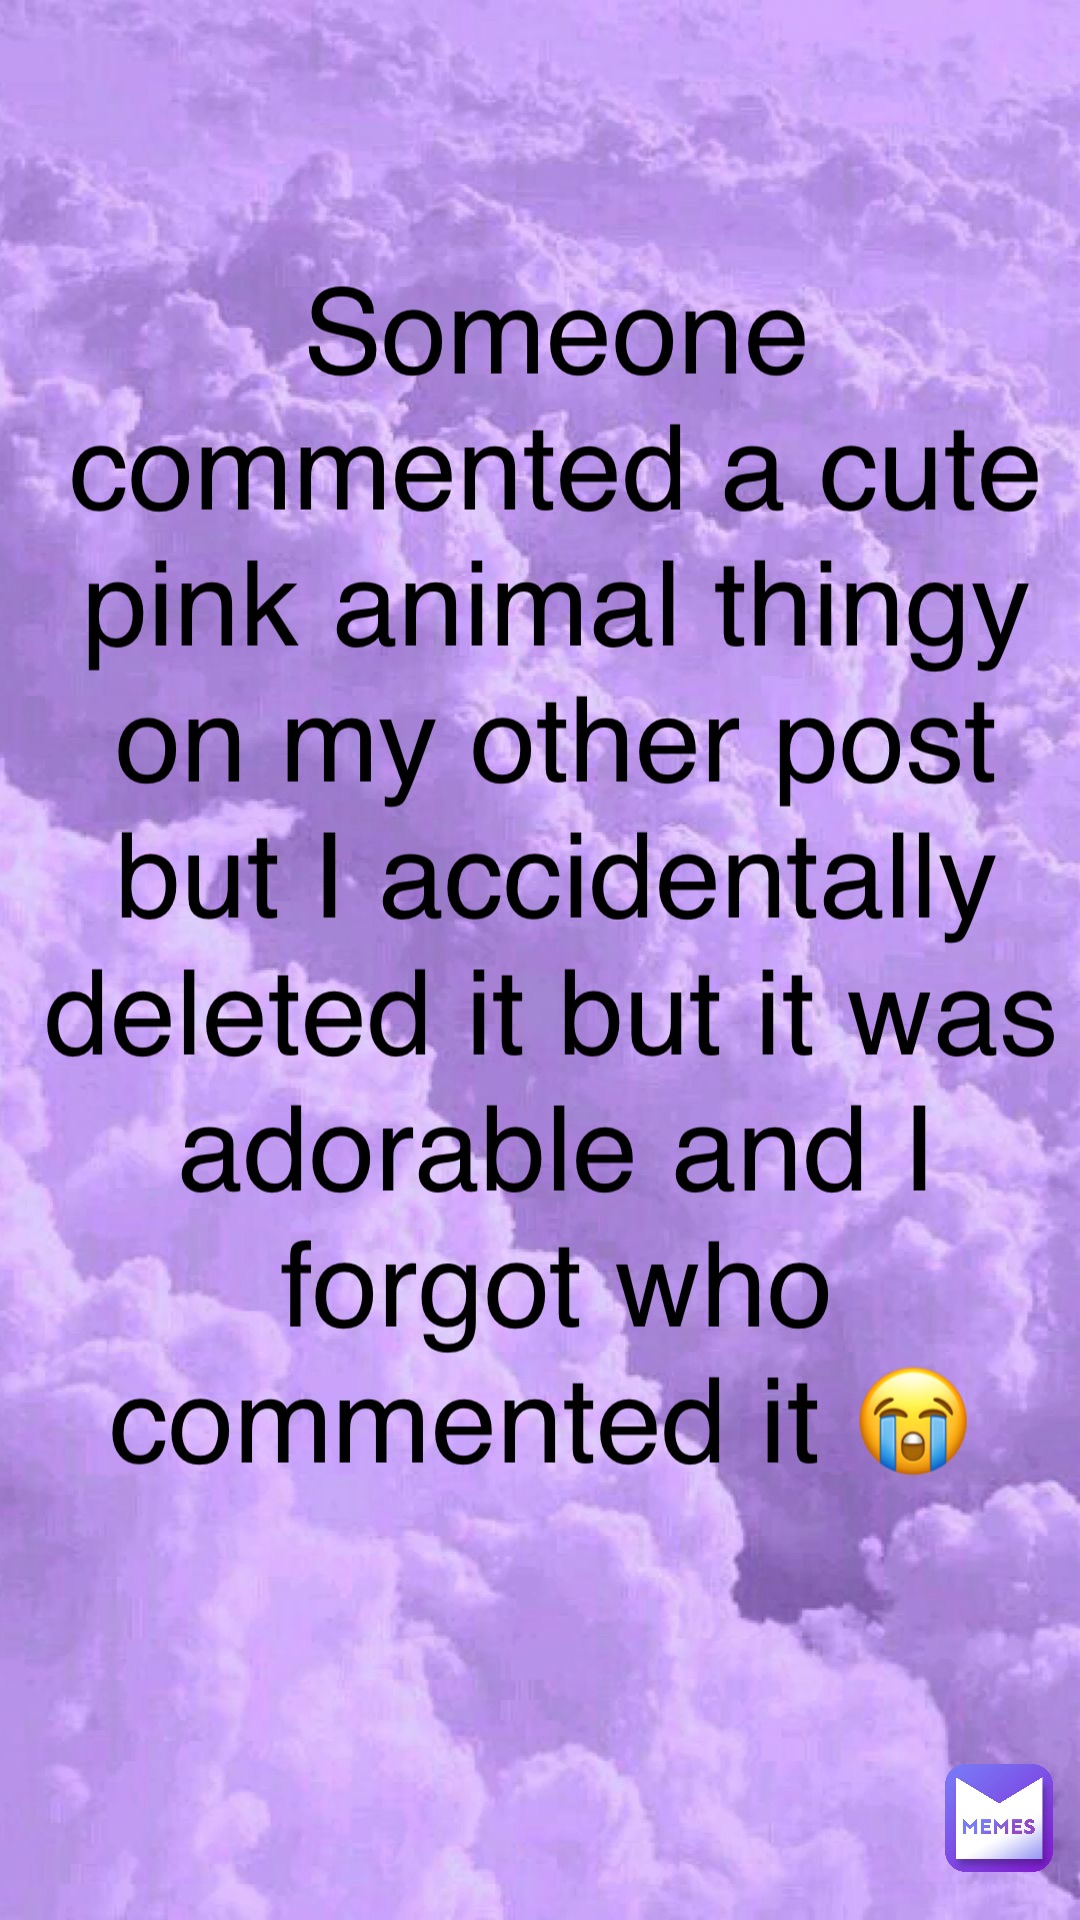 Someone commented a cute pink animal thingy on my other post but I accidentally deleted it but it was adorable and I forgot who commented it 😭